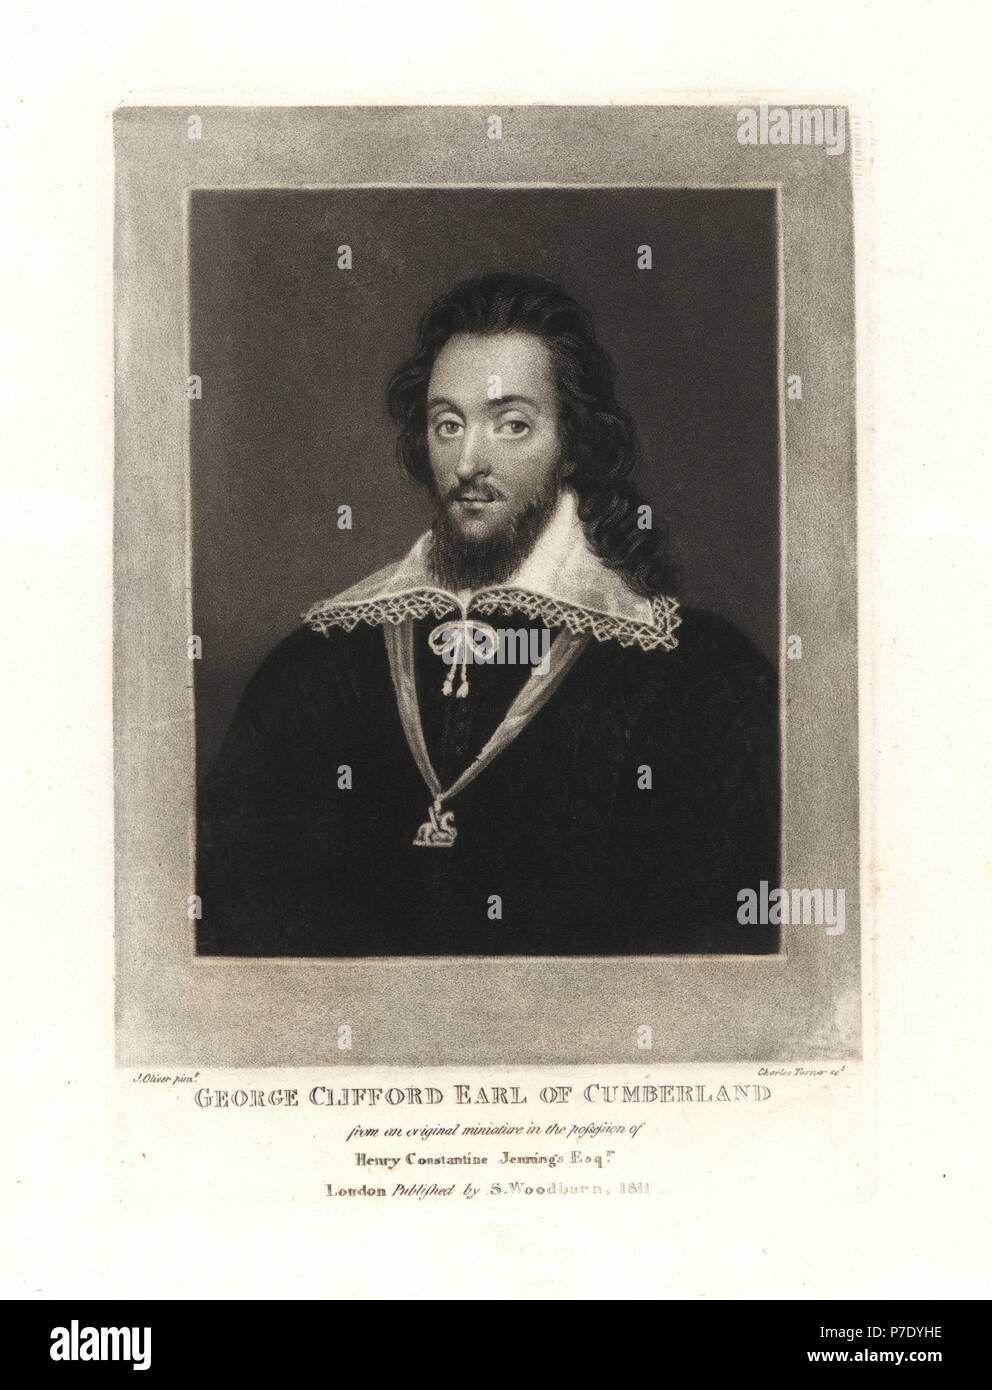 Sir George Clifford, 3rd Earl of Cumberland, naval commander and courtier in the court of Queen Elizabeth I. Copperplate mezzotint by Charles Turner after a miniature painting by Isaac Oliver from Samuel Woodburn's Portraits of Characters Illustrious in British History, London, 1811. Stock Photo